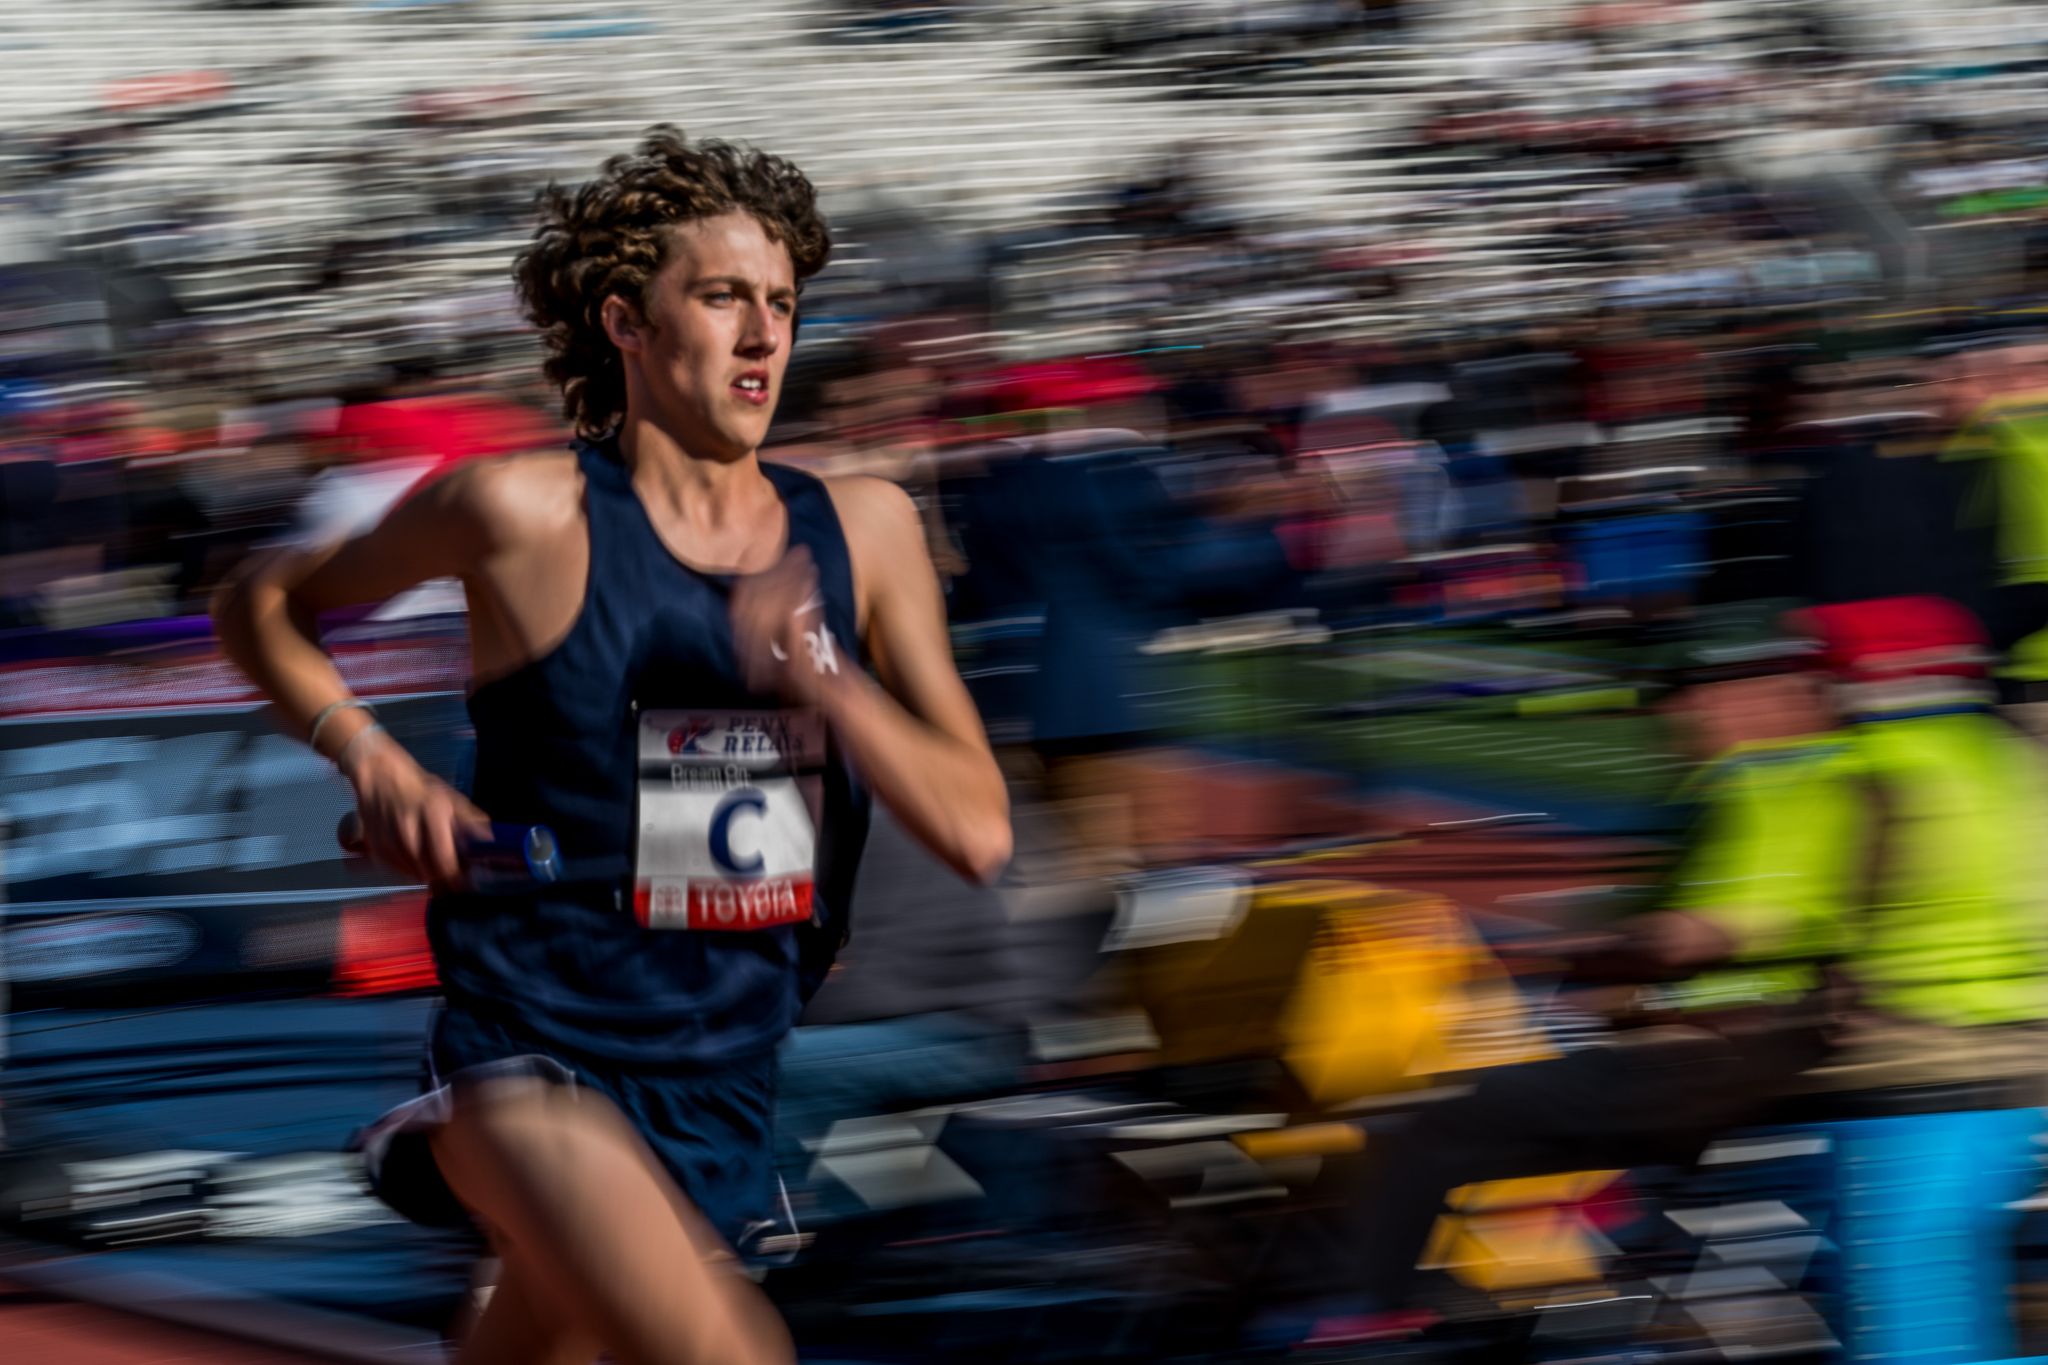 a person running in a race with a blurred background